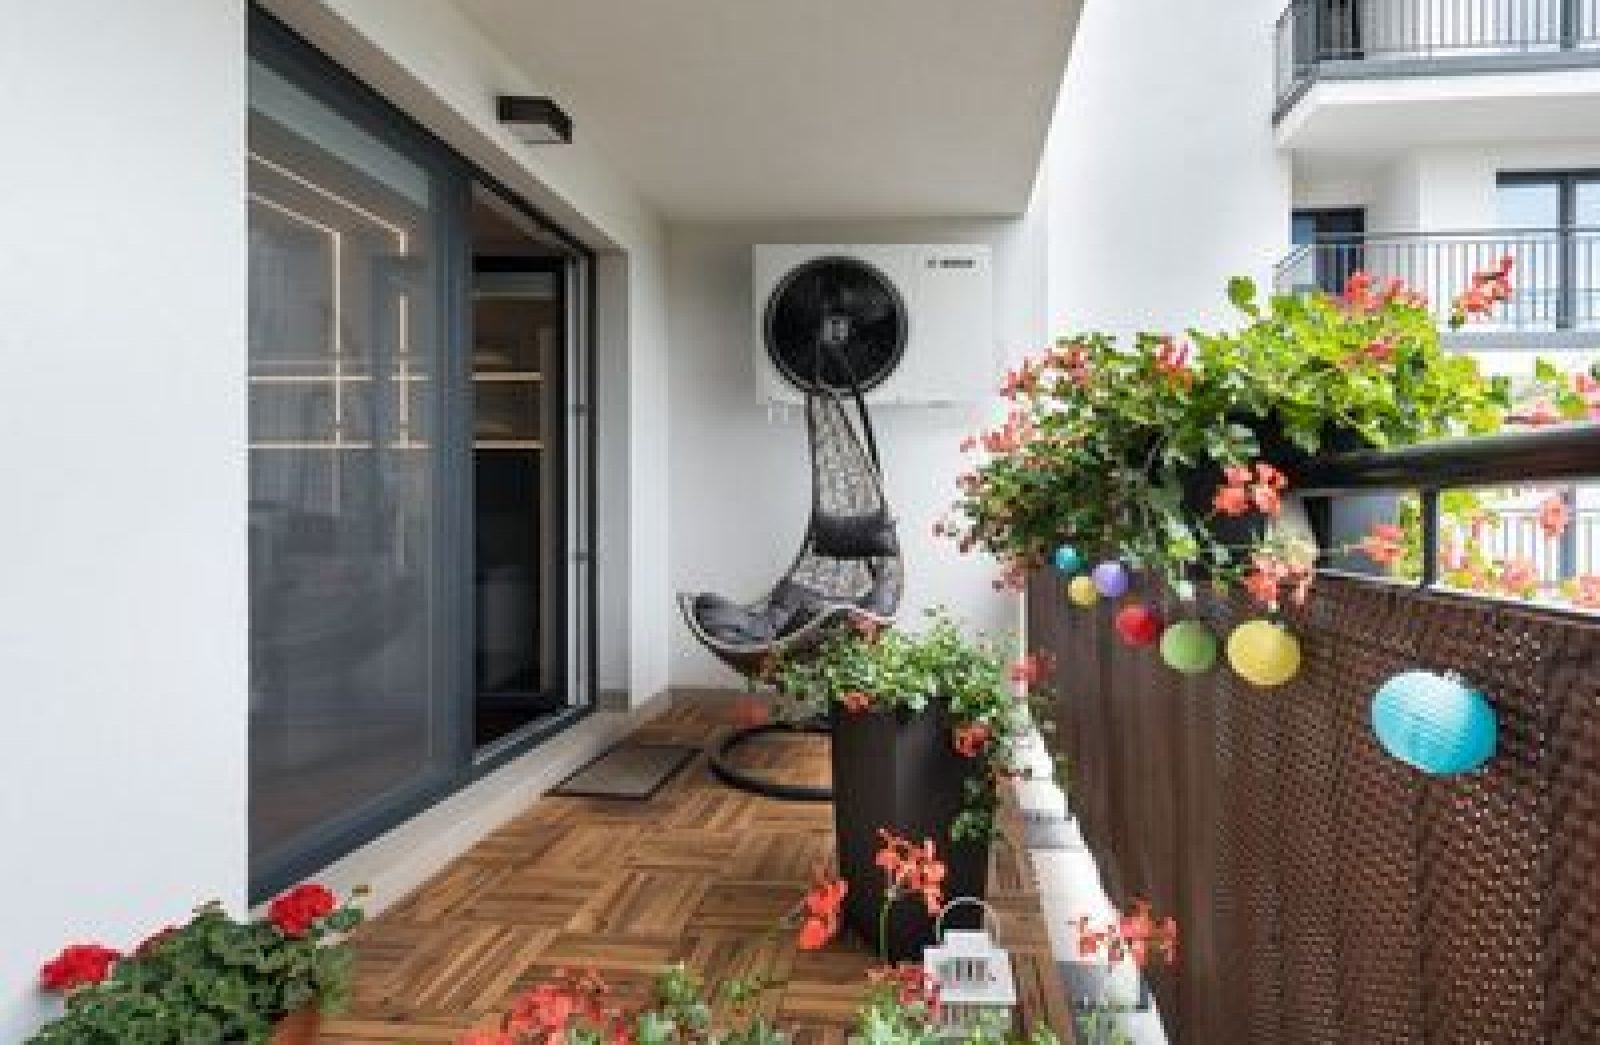 Home terrace with wooden floor and chair; Shutterstock ID 675585040